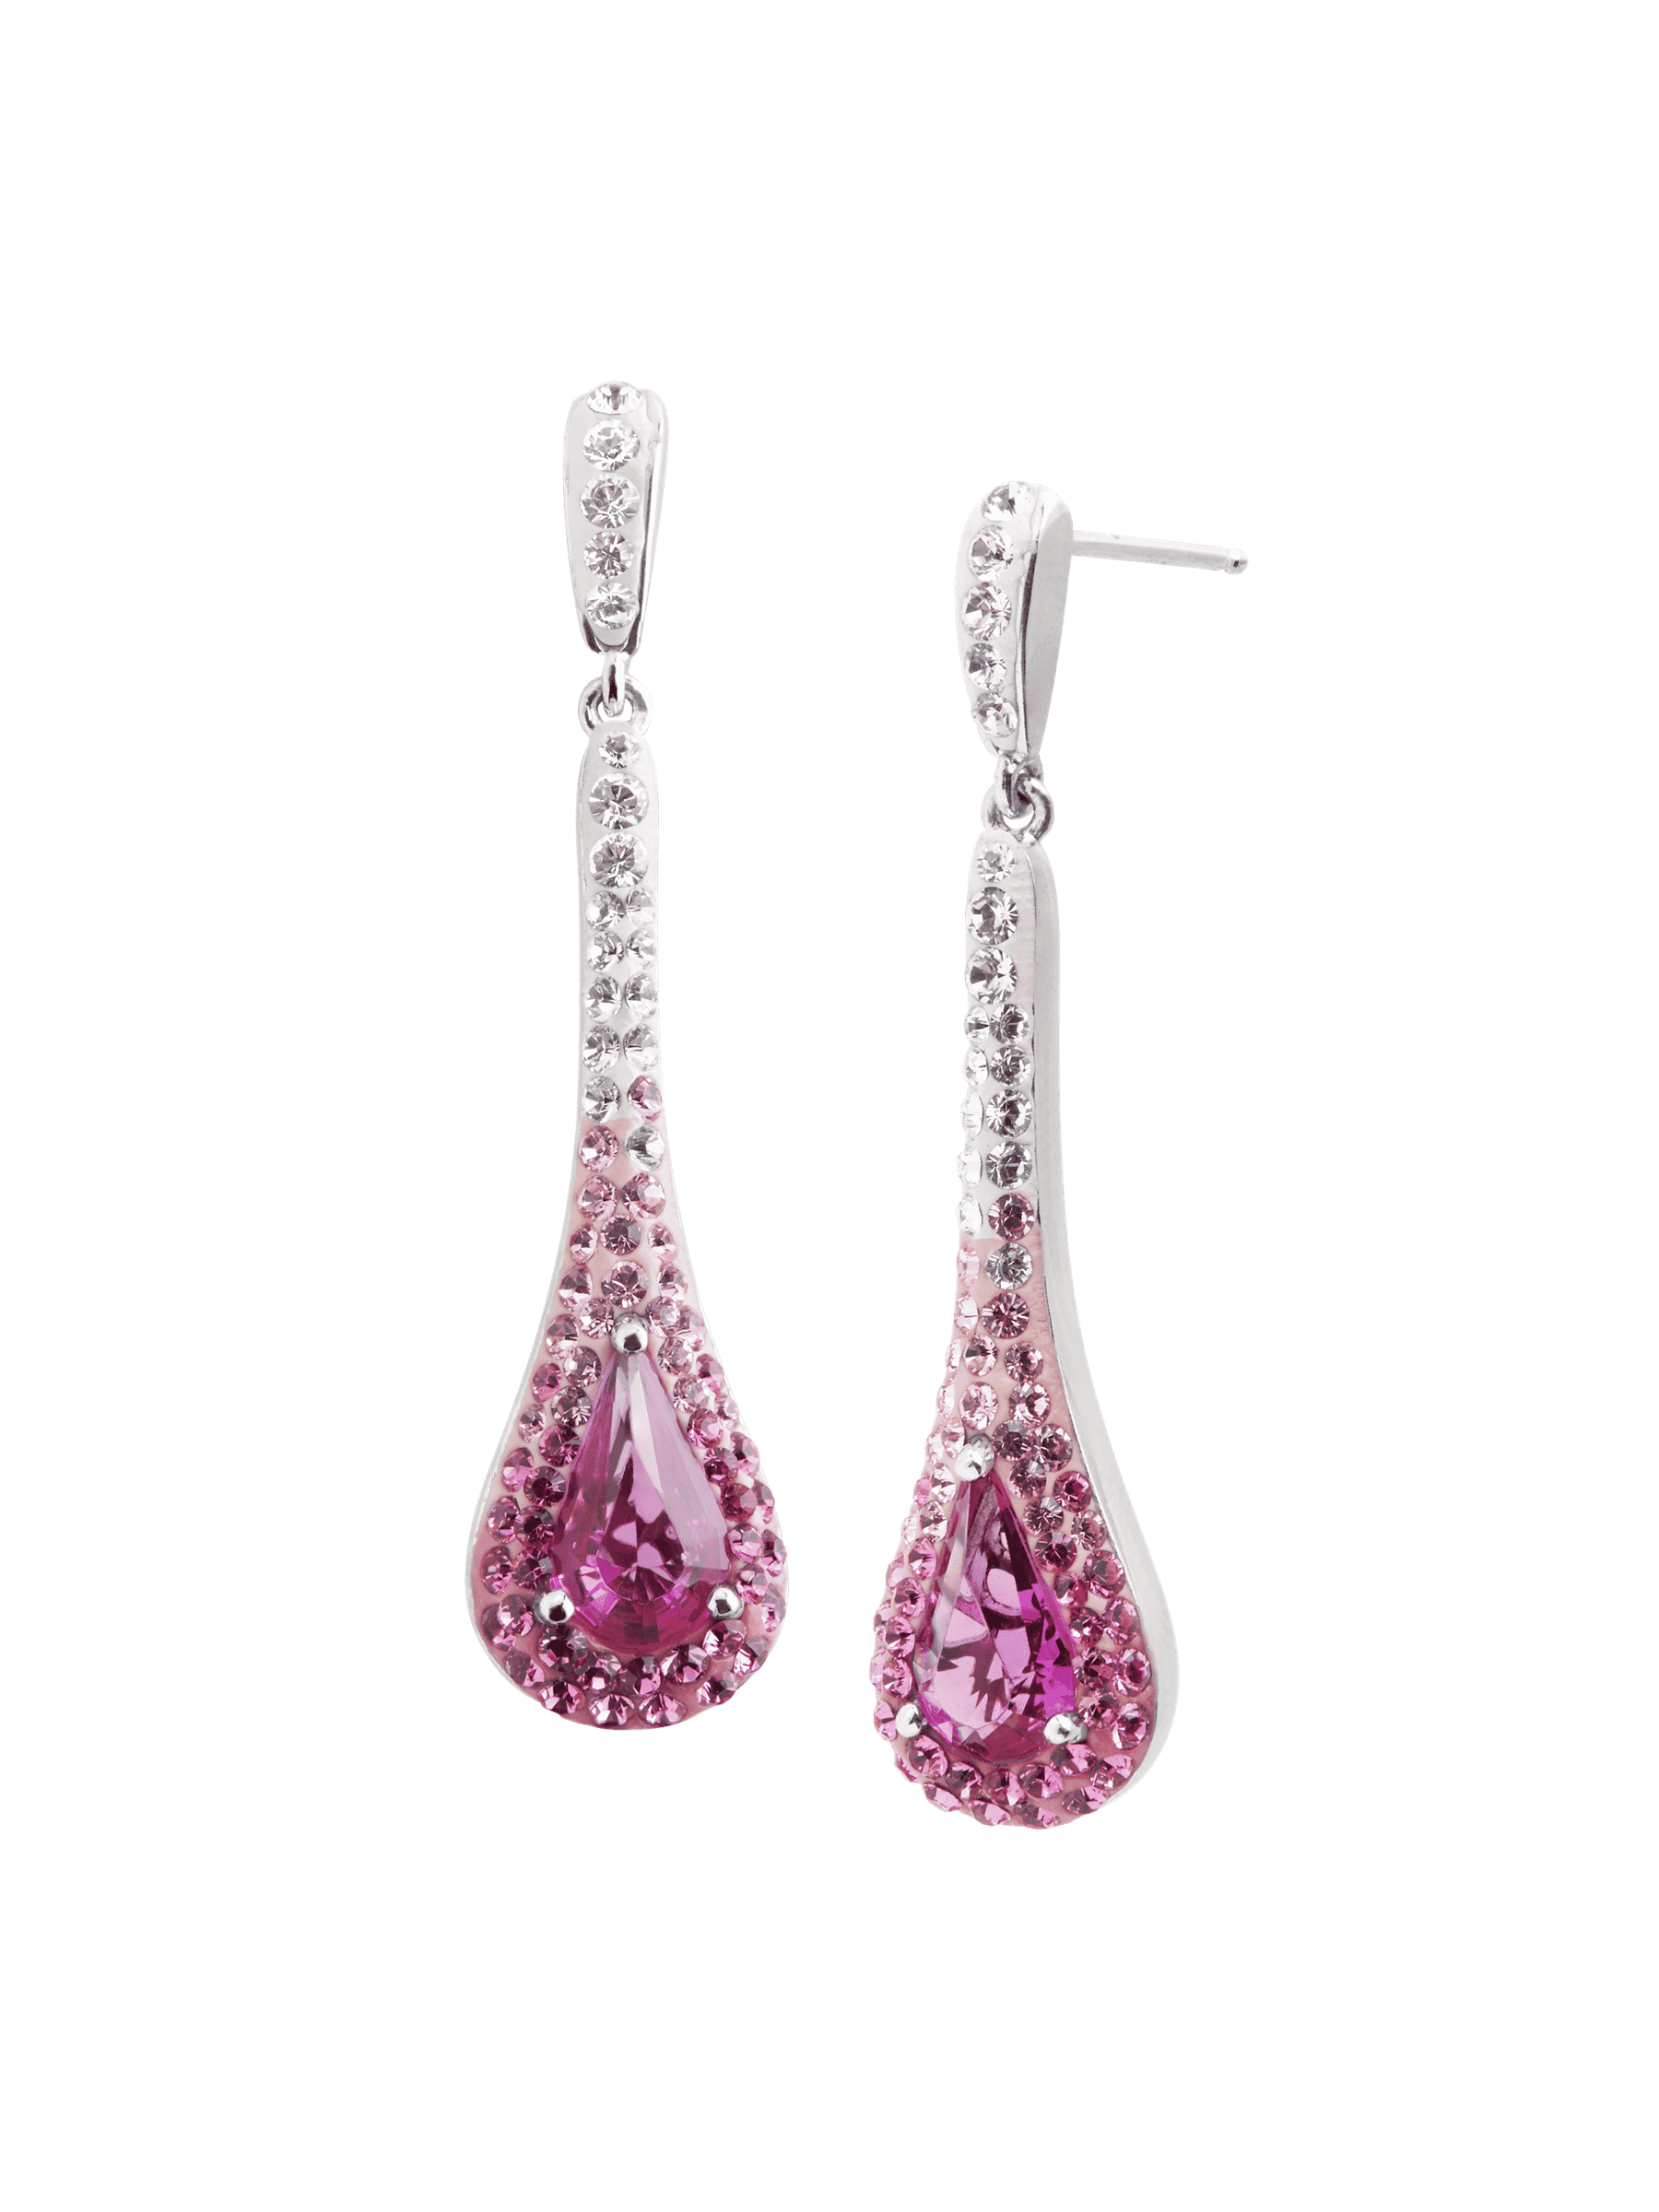 Details about   Pink Stone Earrings 